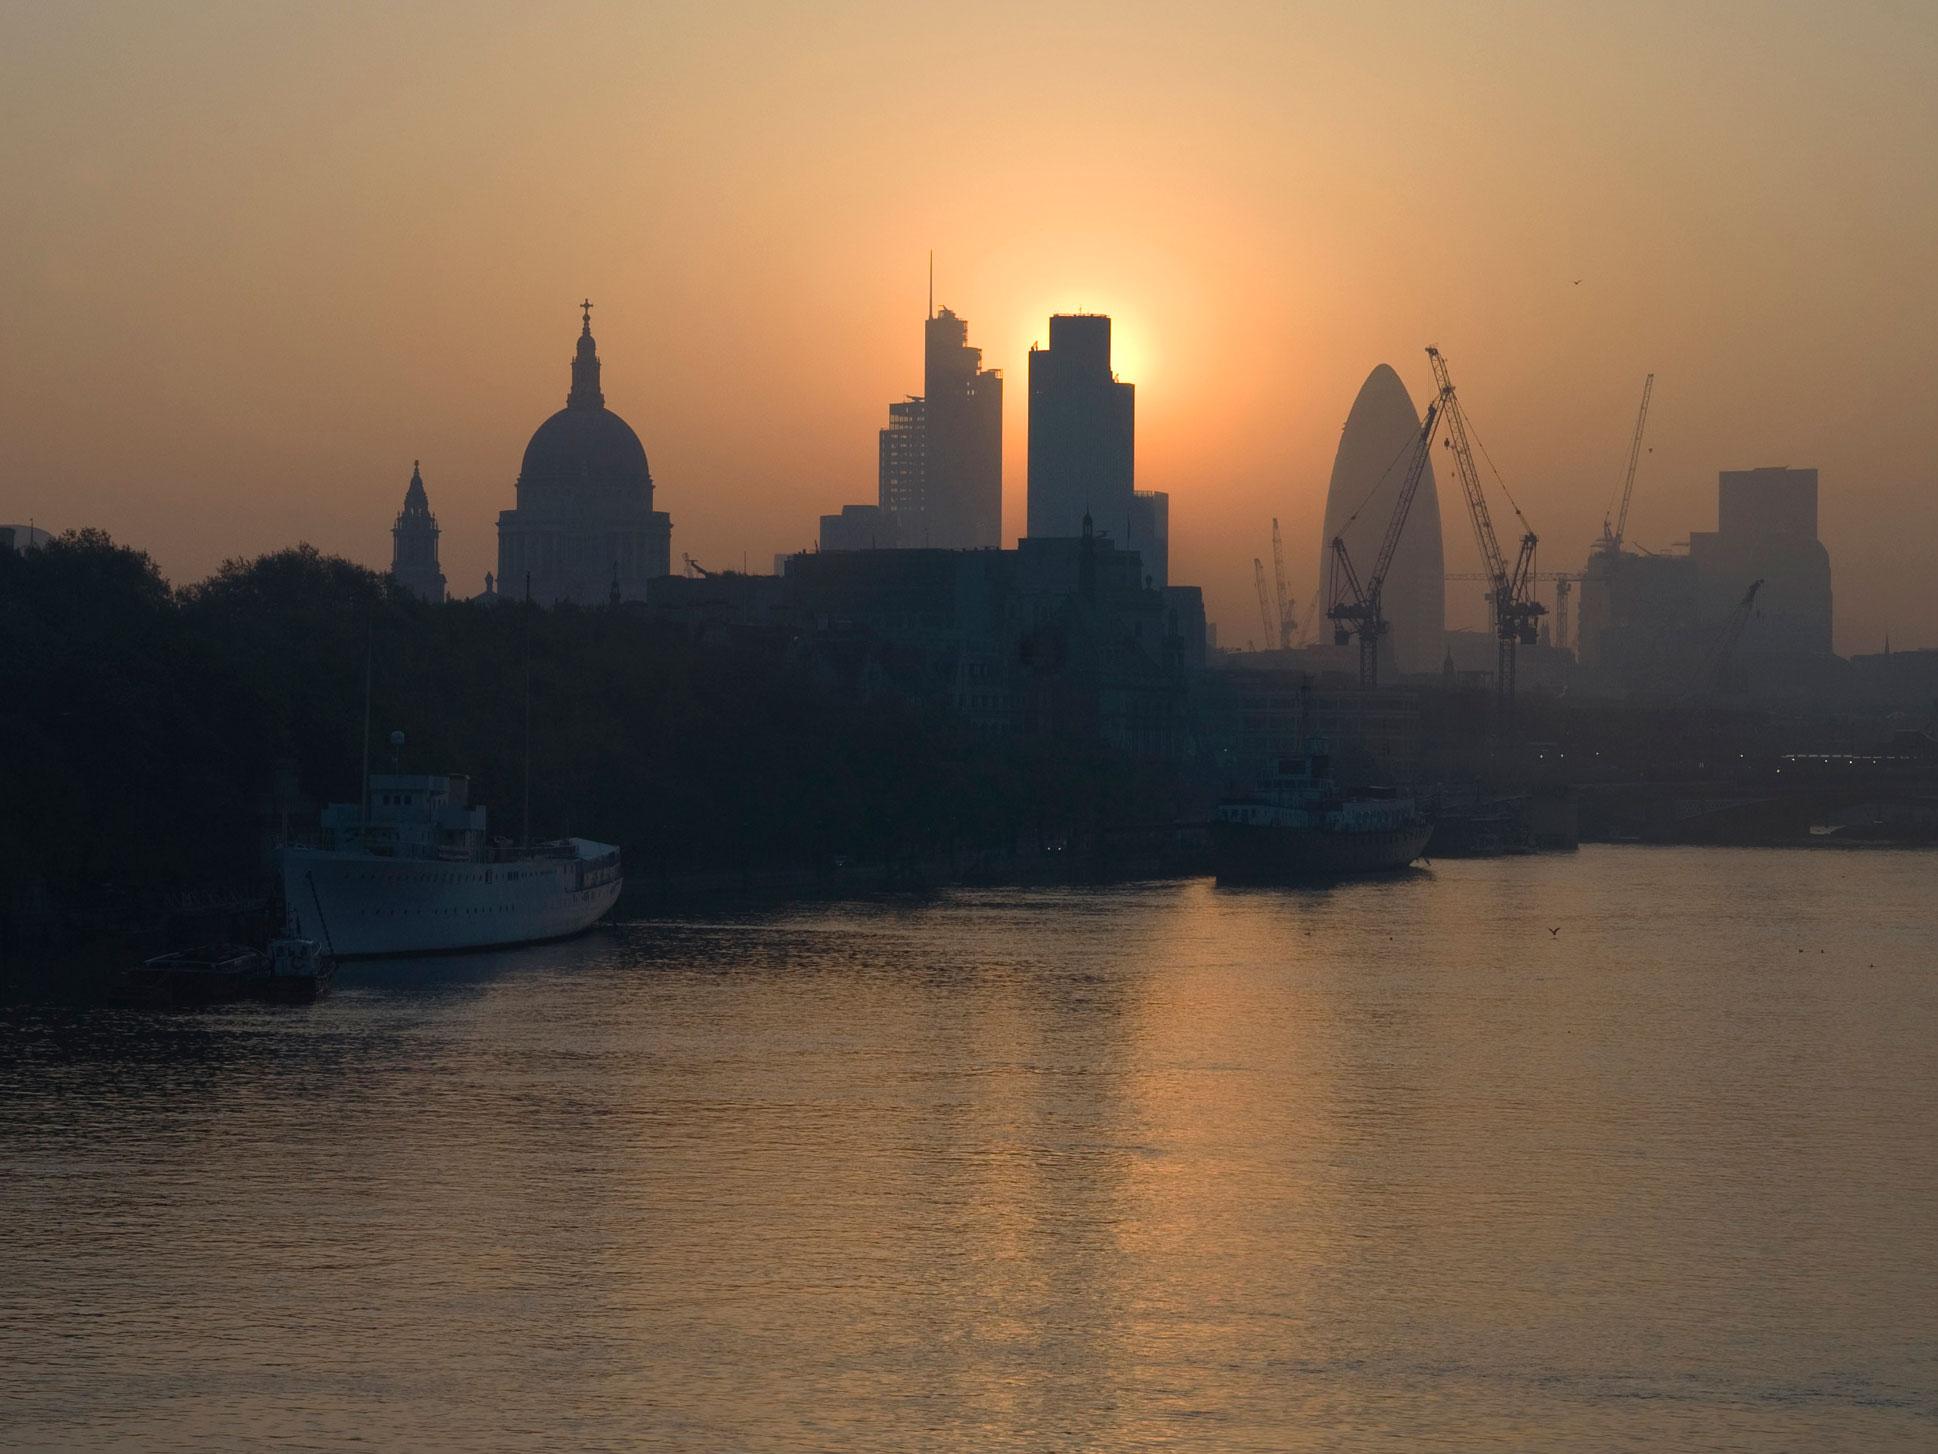 Sunrise over London after a smog alert was issued